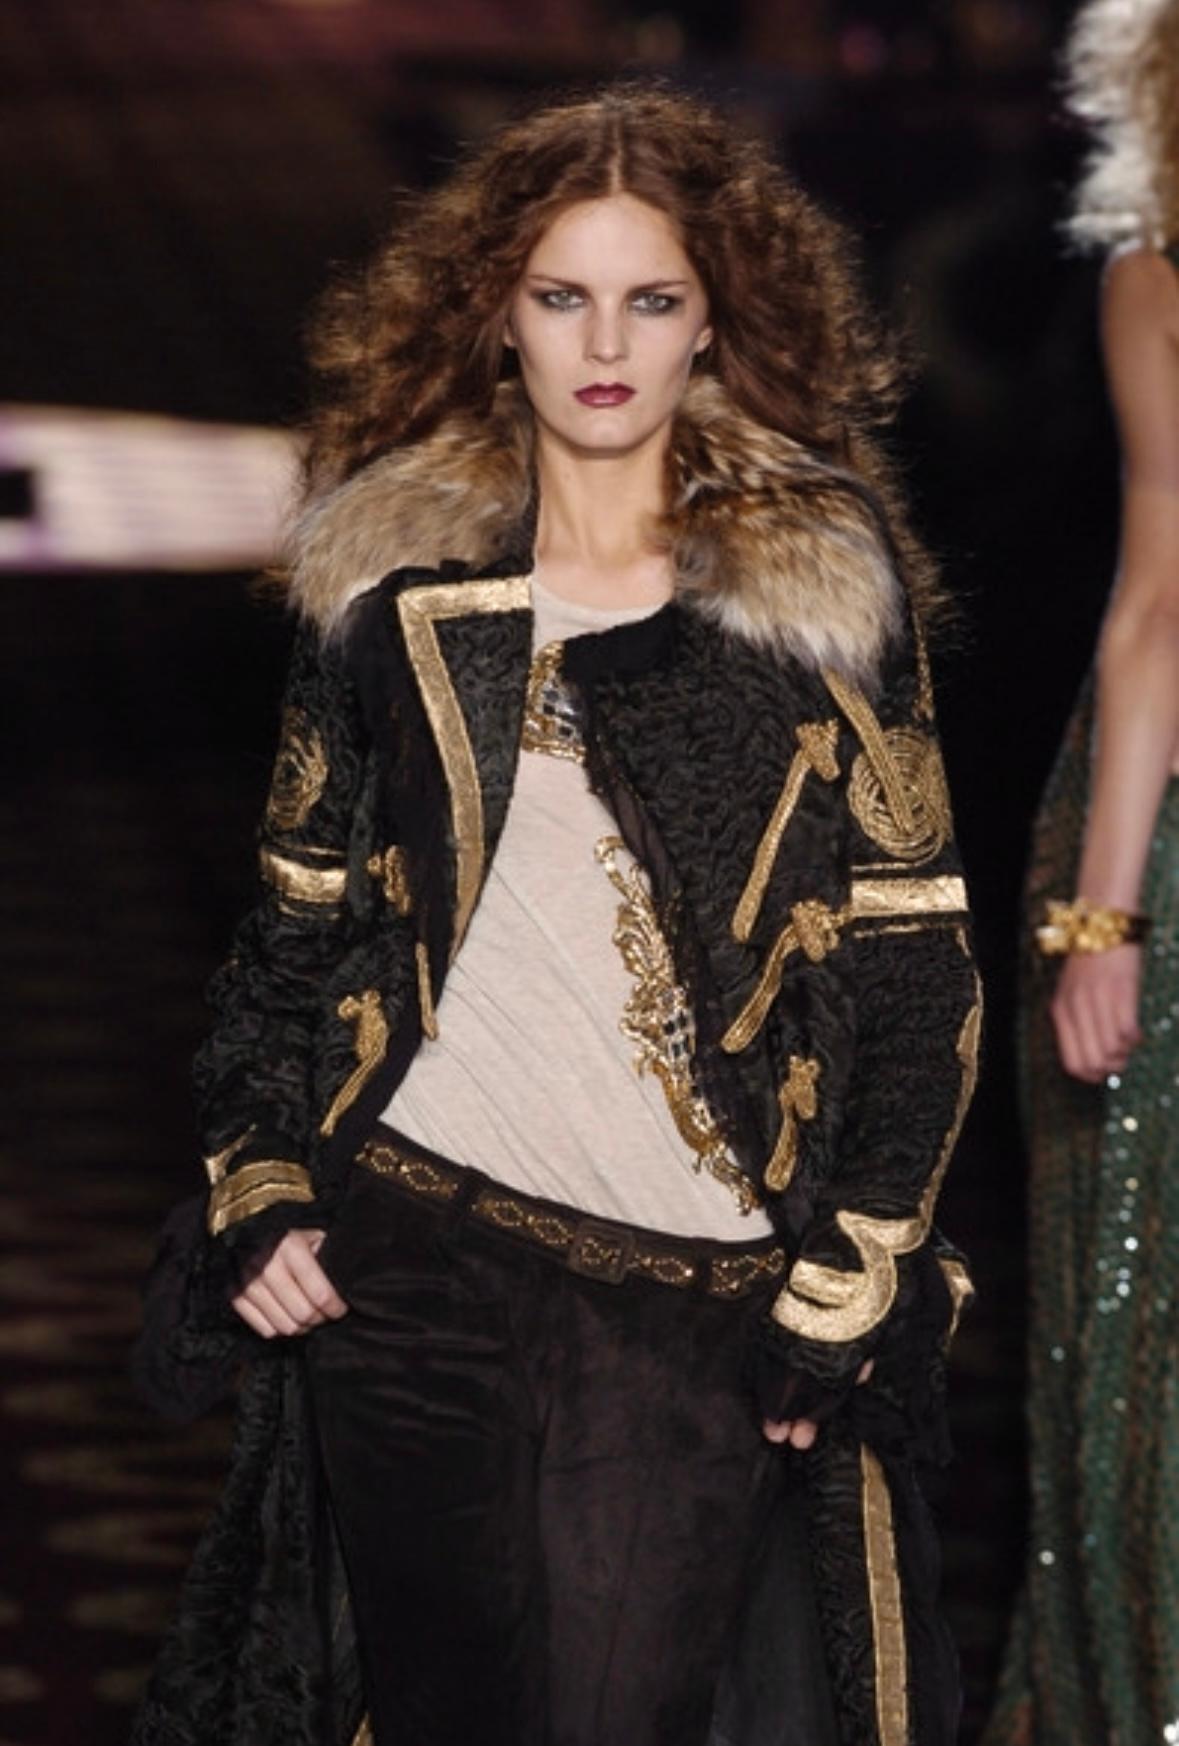 Presenting the most incredible deep purple Persian lamb fur Roberto Cavalli duffle coat. From the Fall/Winter 2004 collection, this coat debuted on the season's runway in dark green as part of look 24 modeled by Marcelle Bittar. This fabulous coat